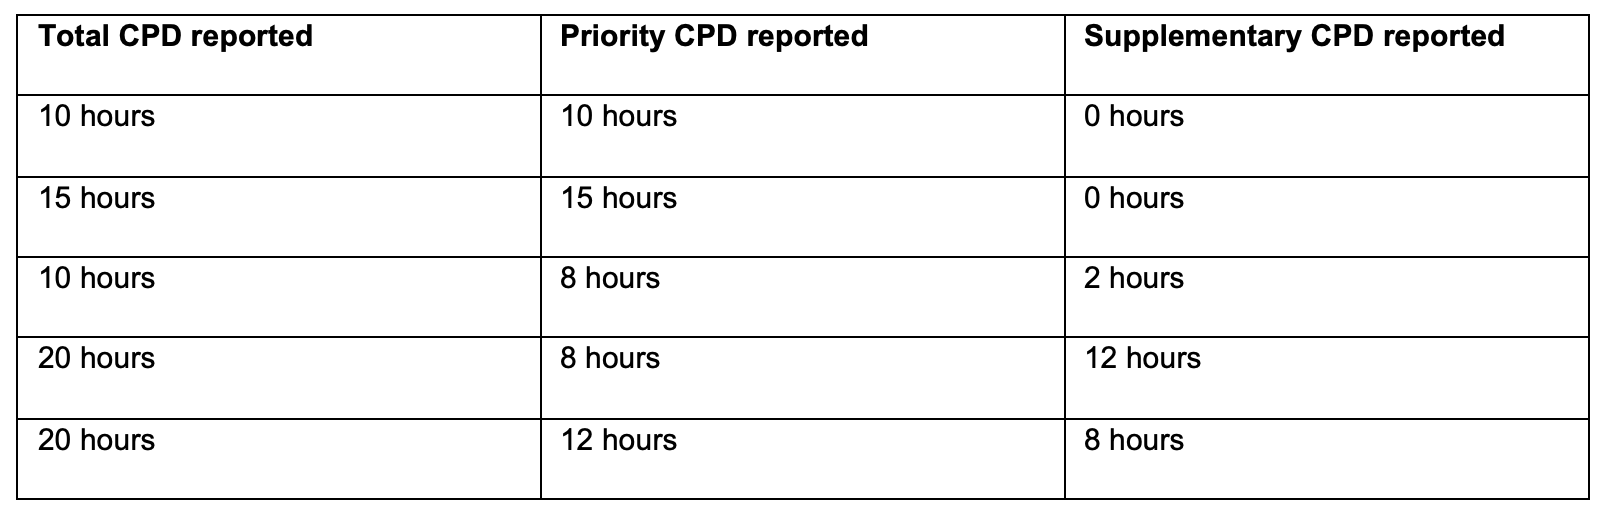 If your CPD target is 10 hours, you can demonstrate compliance as follows